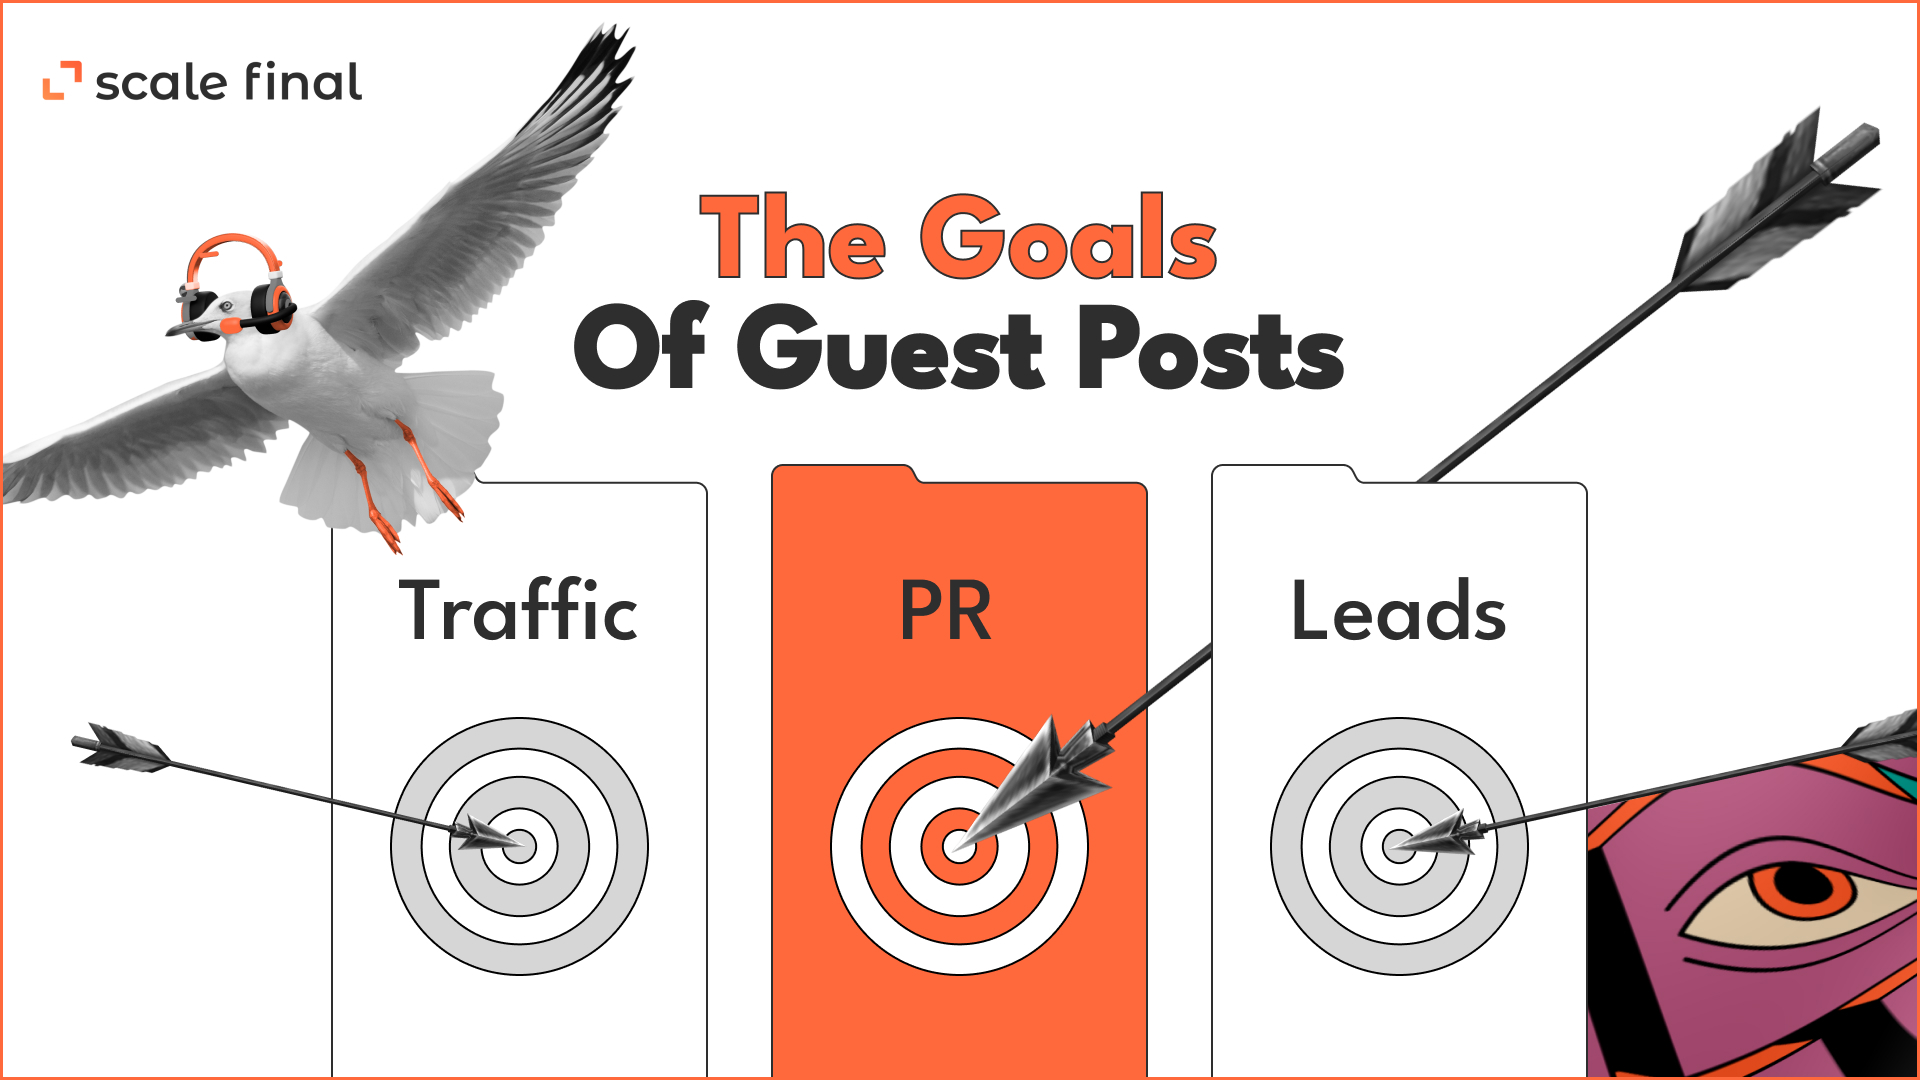 The Goals of Guest Posts